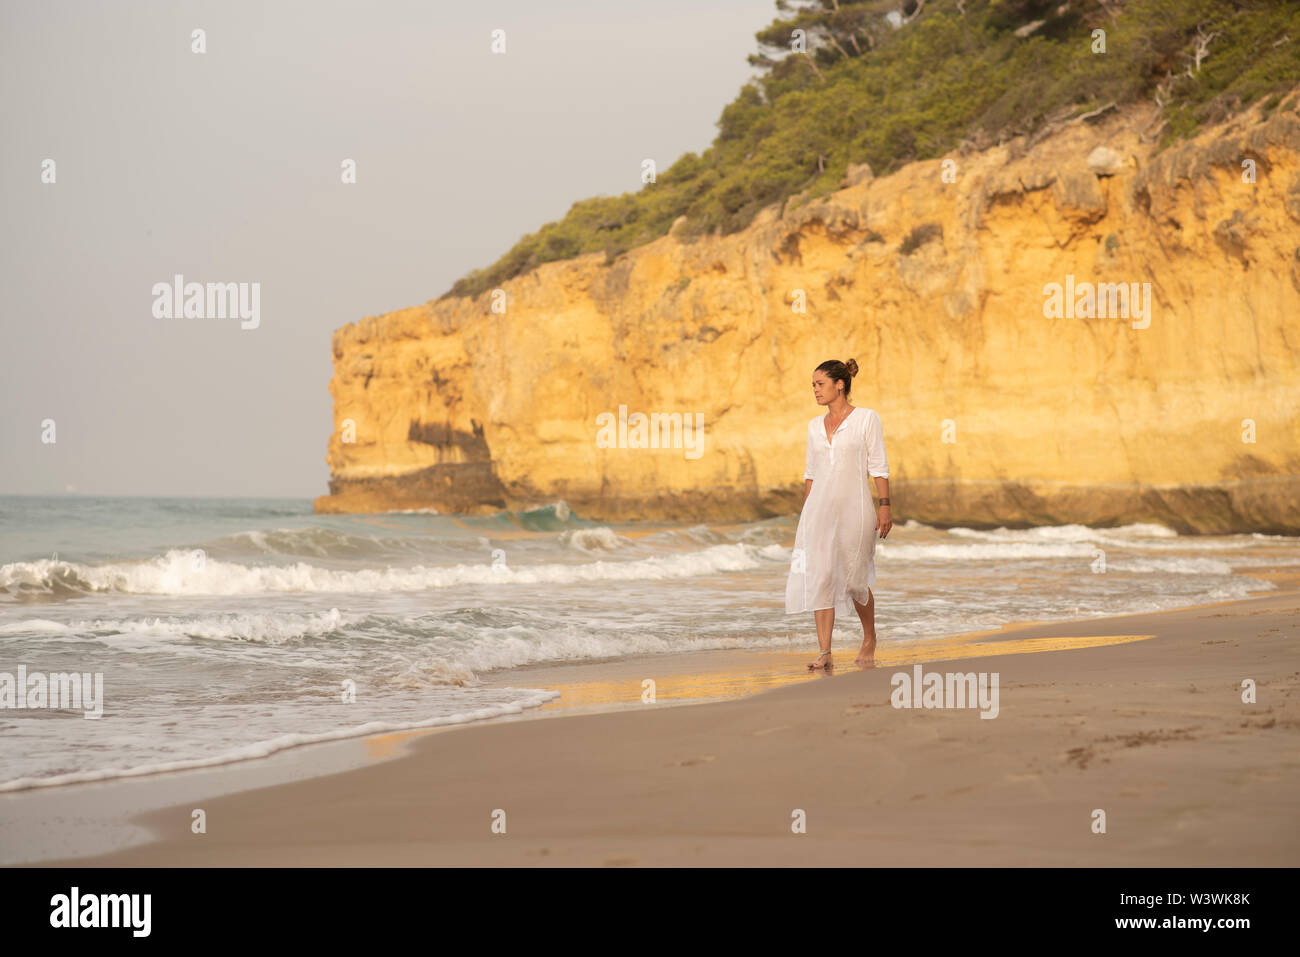 Woman with white dress walking along a wild beach with cliffs. Stock Photo